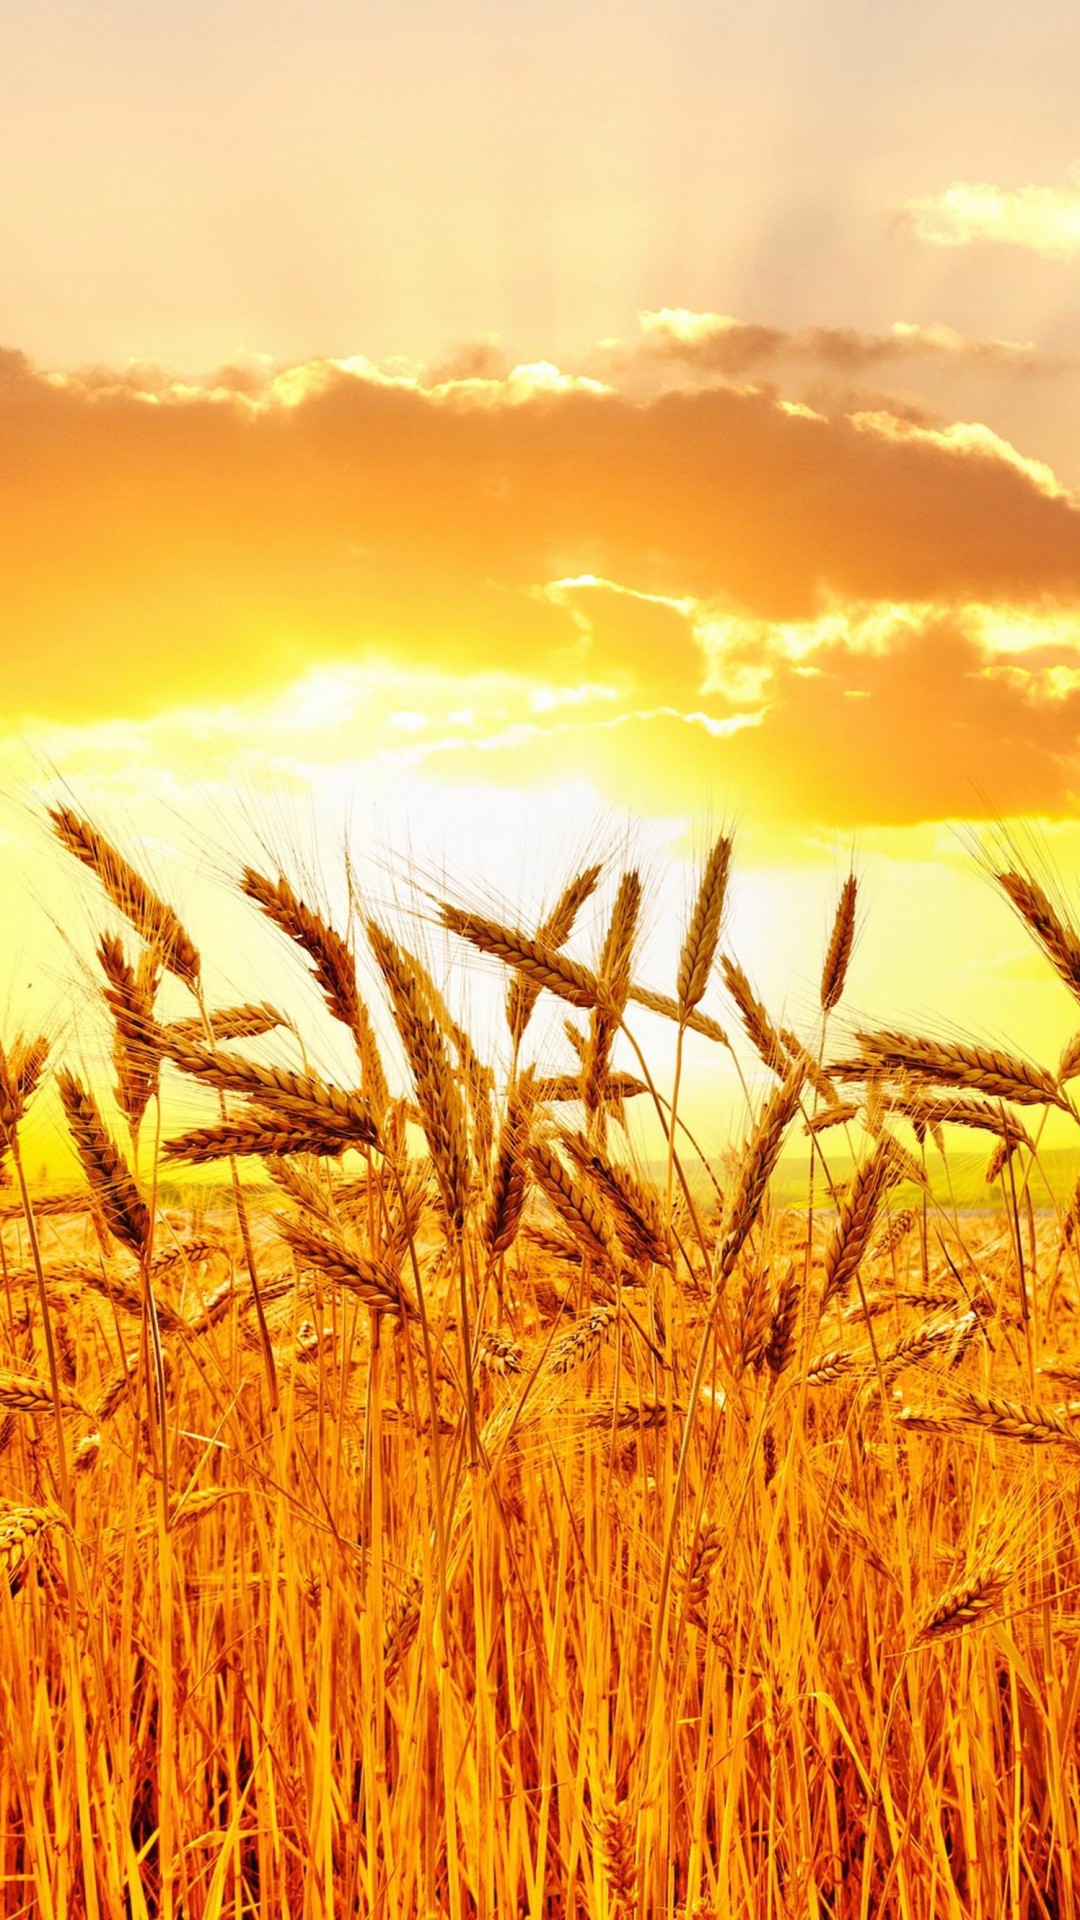 Golden Wheat Field At Sunset Wallpaper for SONY Xperia Z1